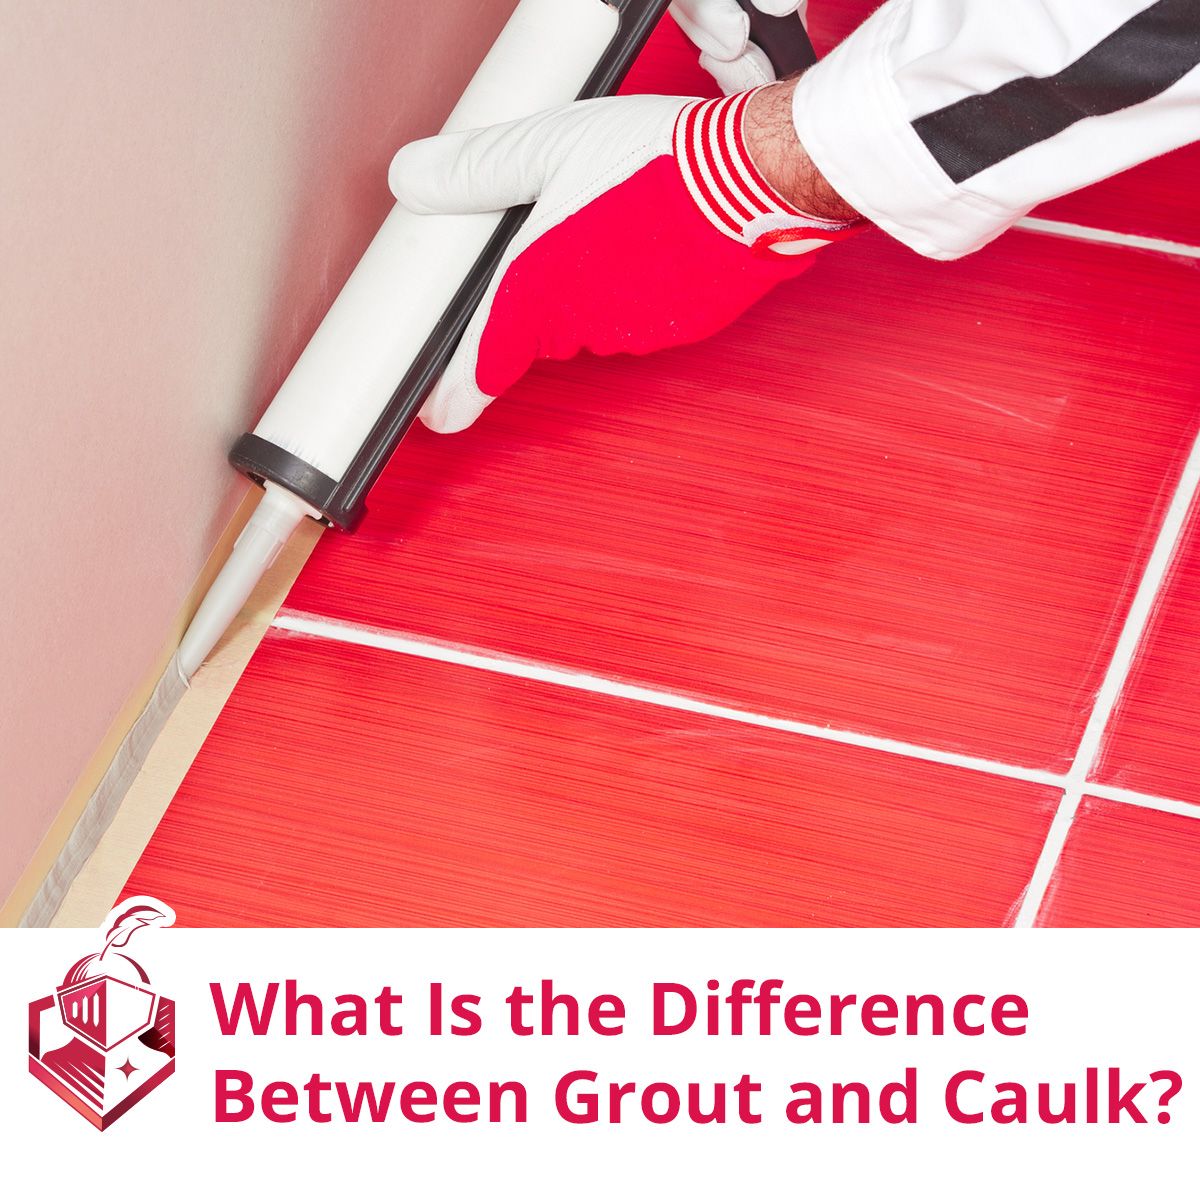 What Is the Difference Between Grout and Caulk?